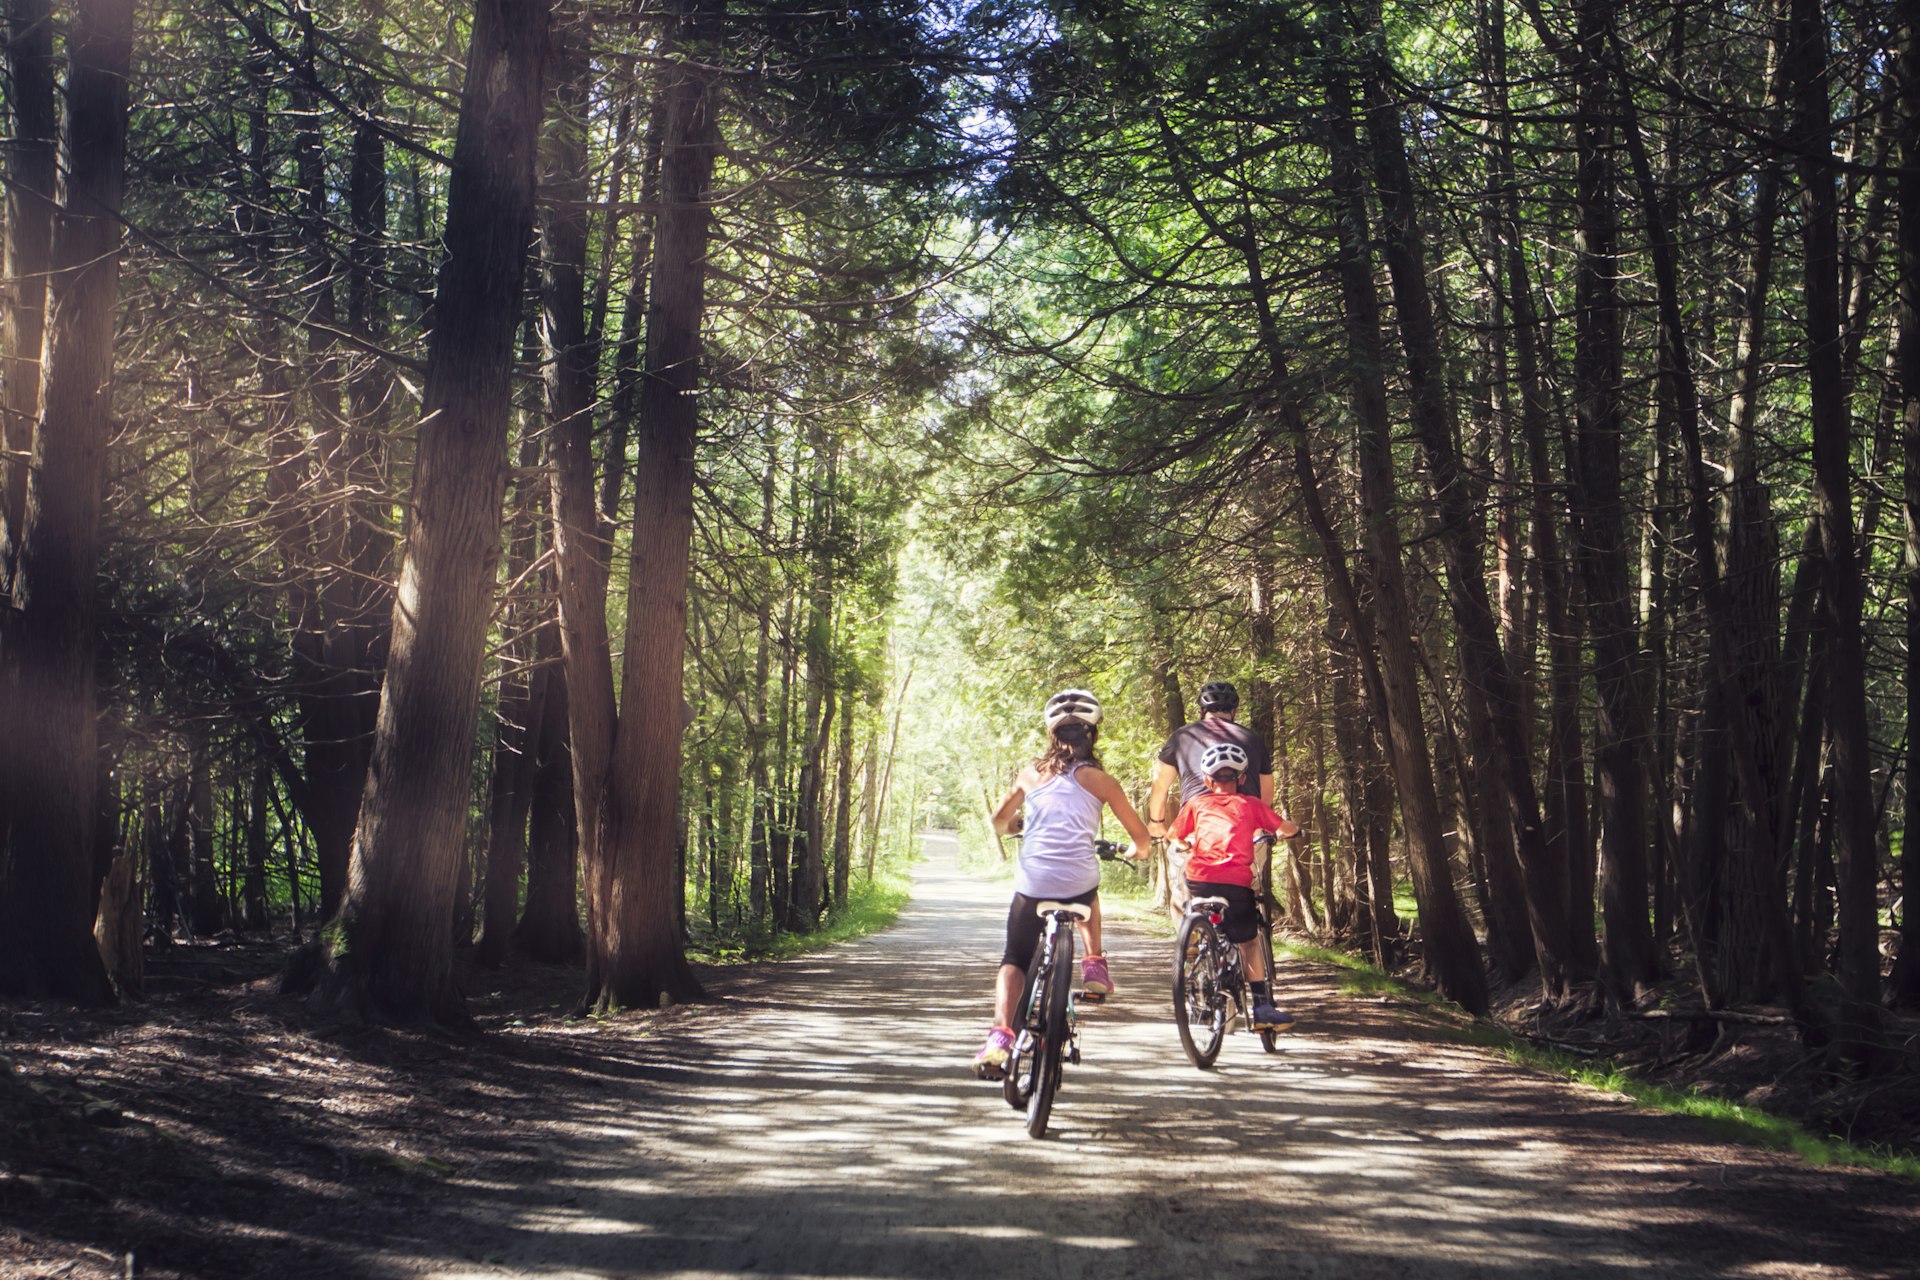 Two children and an adult cycle down a woodland trail